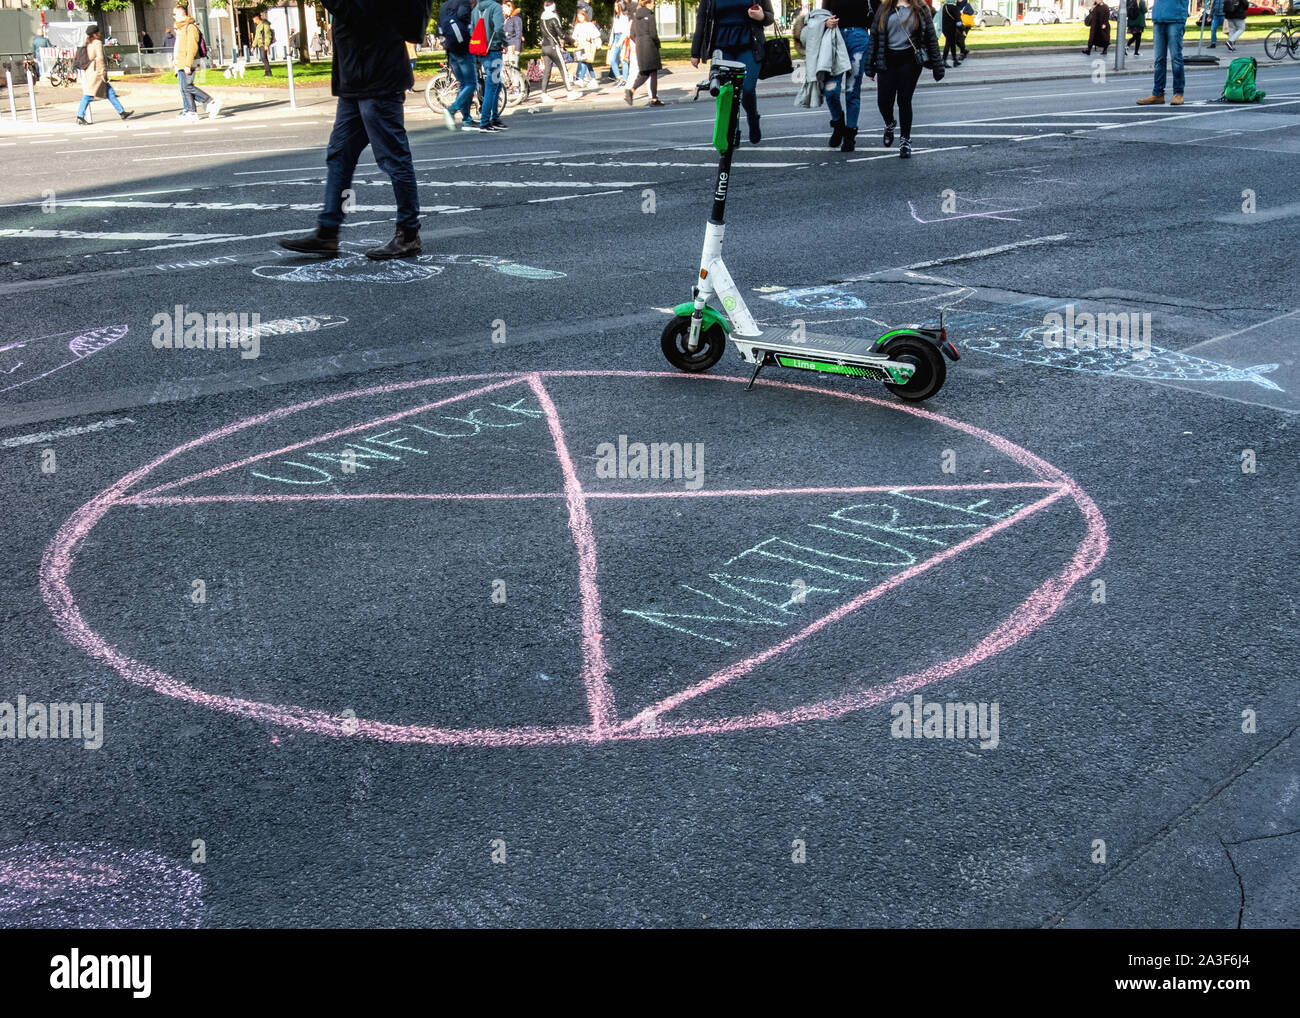 Germany, Berlin, Potsdamer Platz, 7th October 2019. Extinction Rebellion (XR) Protest in Berlin for more climate protection and the prevention of species extinction. . Demonstrators occupied a major traffic intersection at Potsdamer Platz and brought traffic to a halt. Credit: Eden Breitz/Alamy Stock Photo